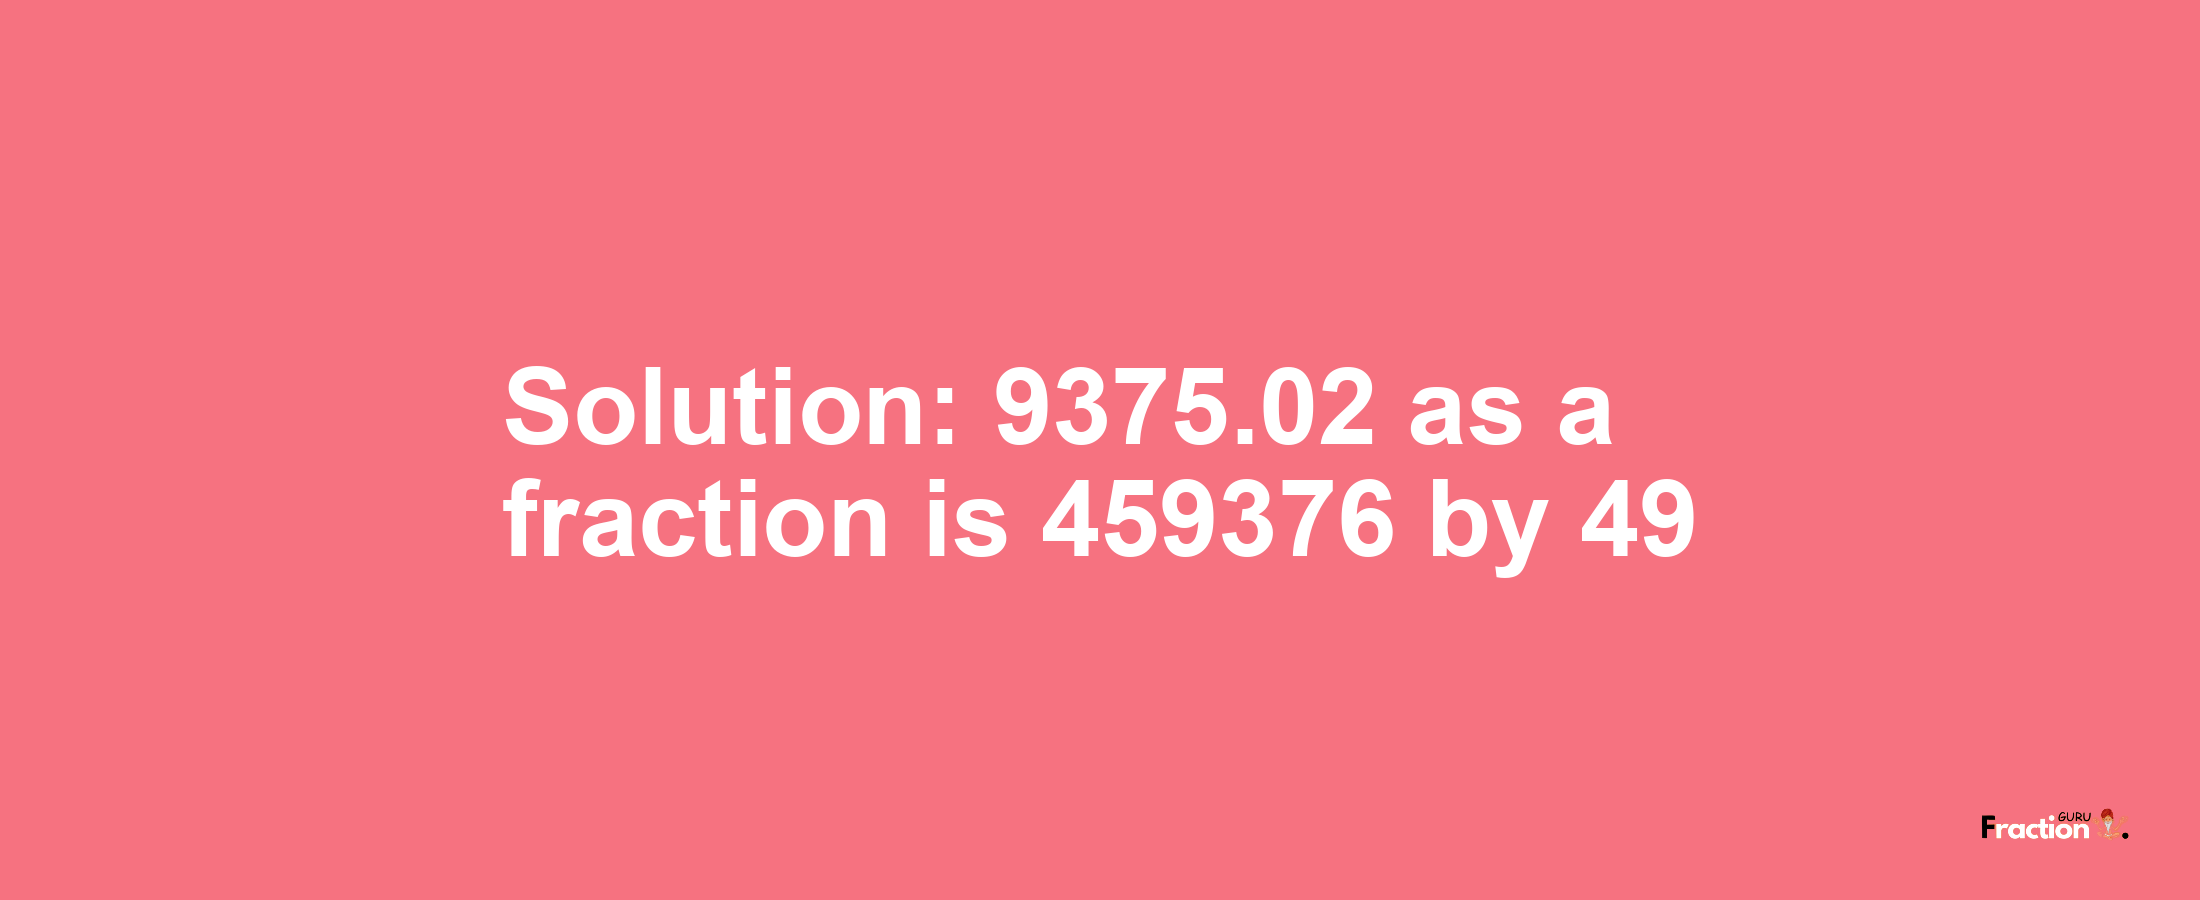 Solution:9375.02 as a fraction is 459376/49